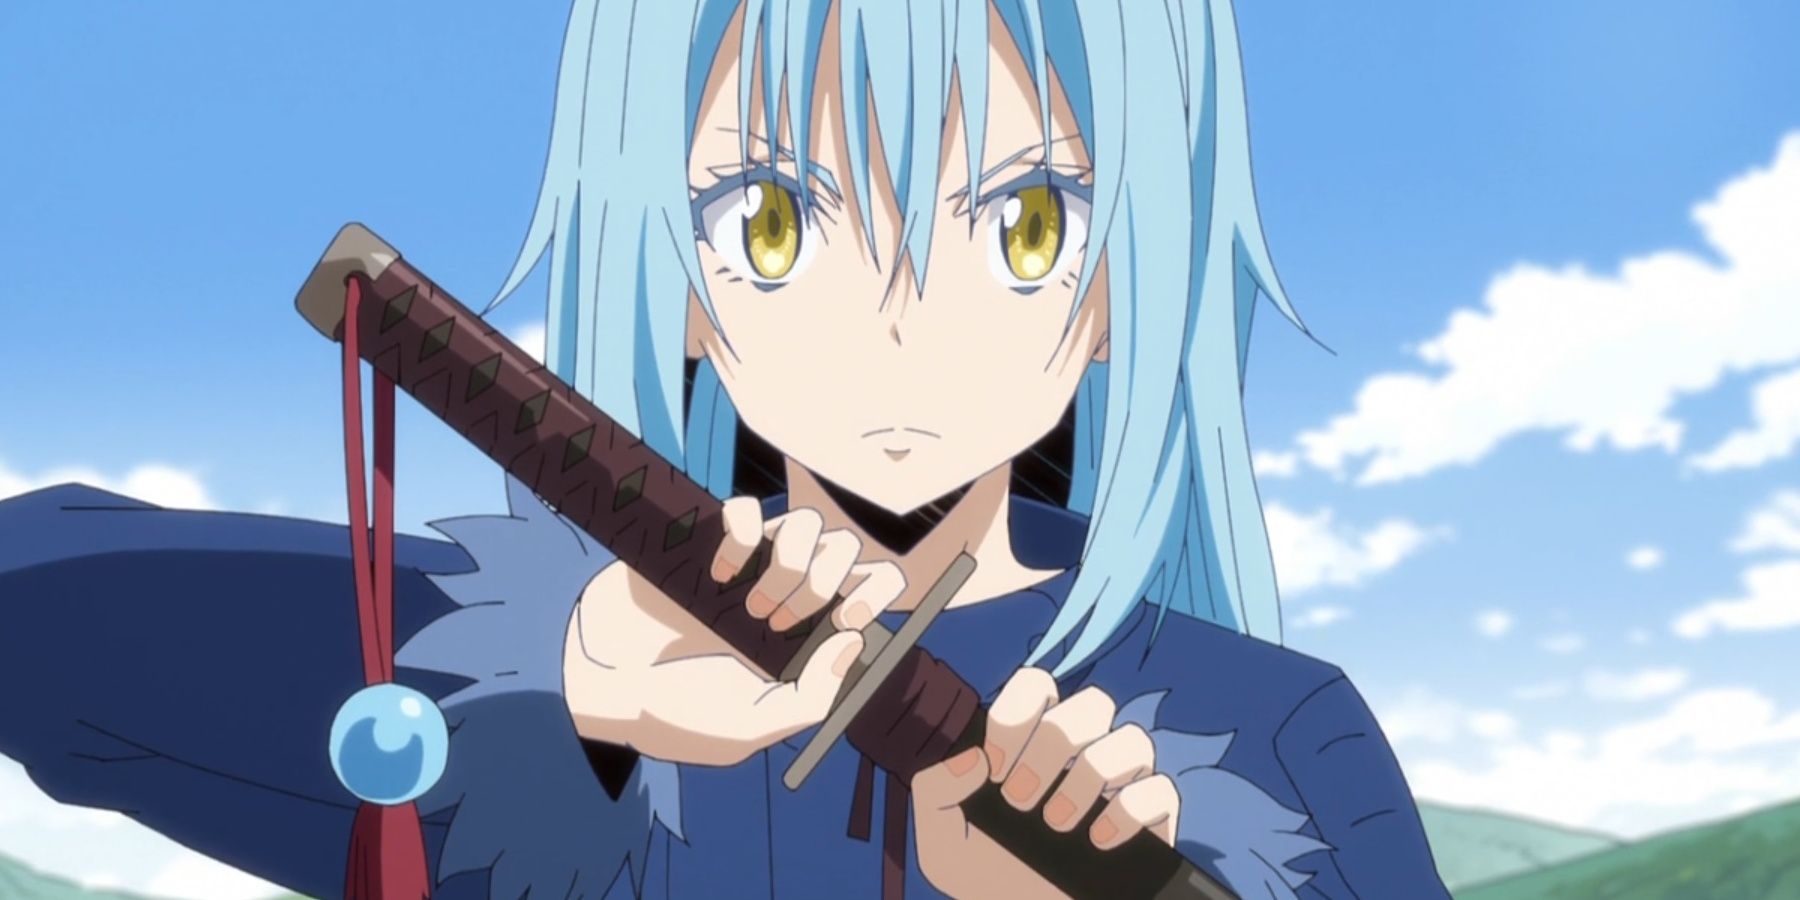 Is the 'Reincarnated as a Sword' Anime Linked to 'That Time I Got  Reincarnated as a Slime?